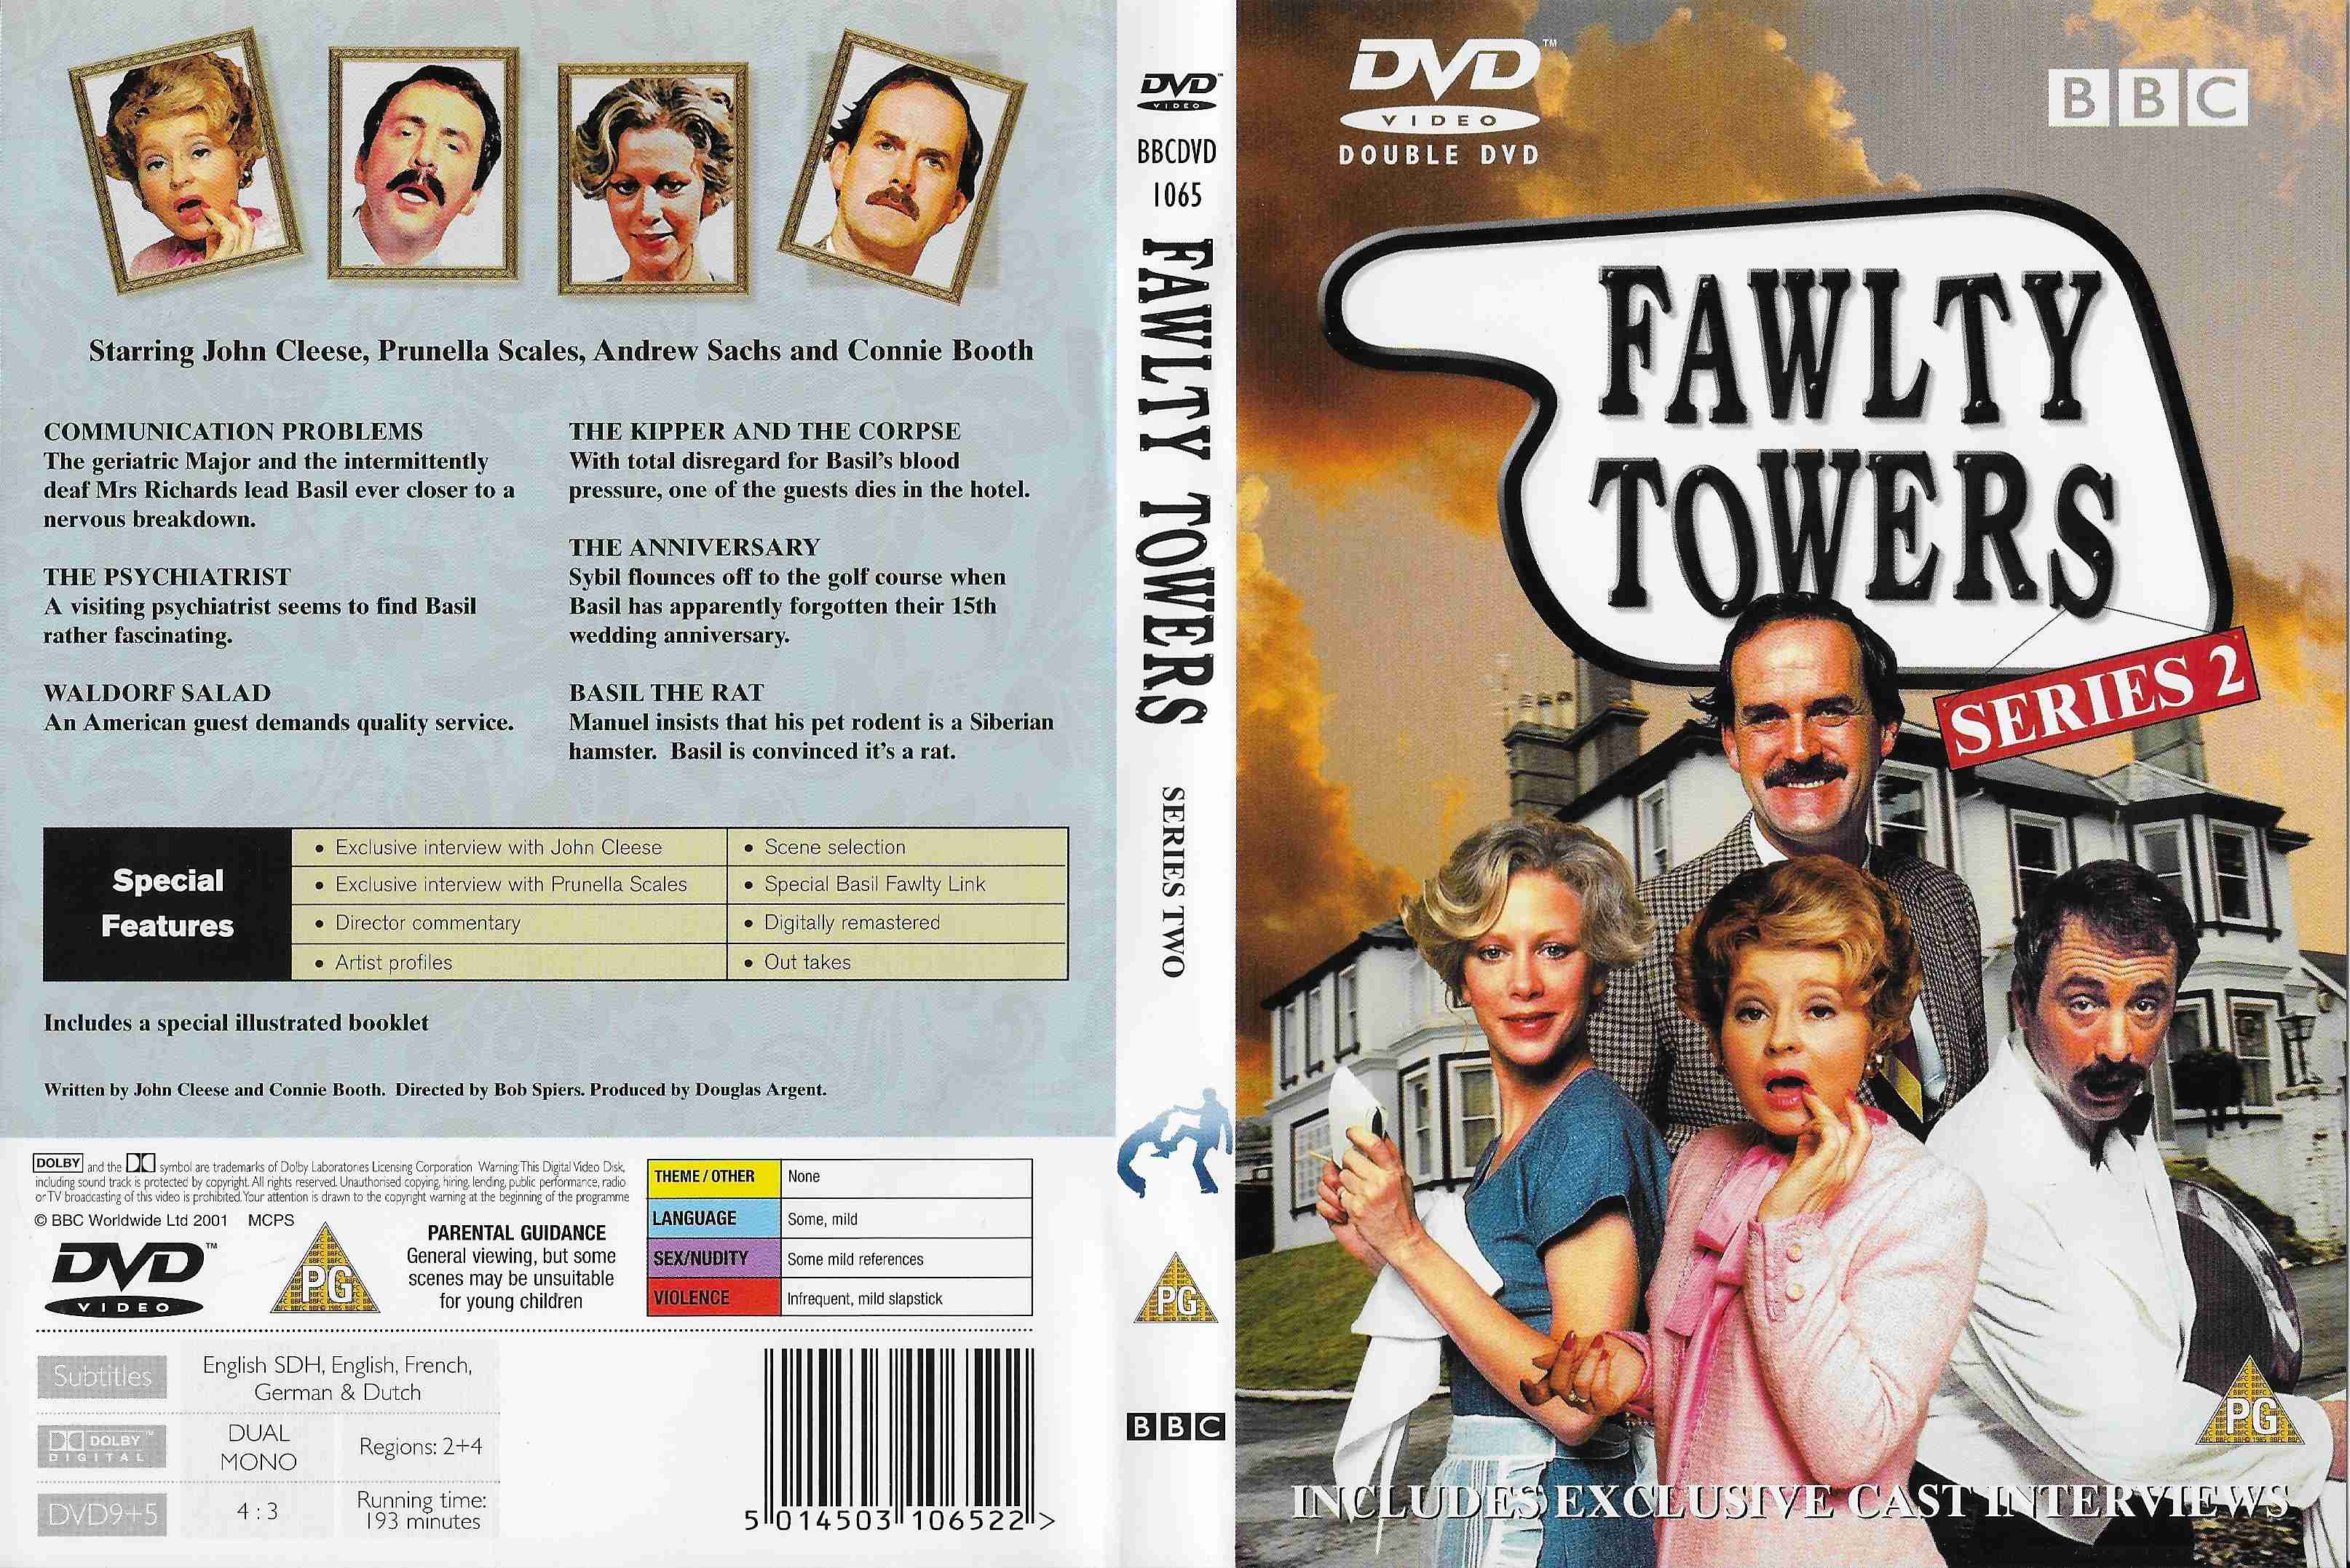 Picture of BBCDVD 1065 Fawlty Towers - Series 2 by artist John Cleese / Connie Booth from the BBC records and Tapes library